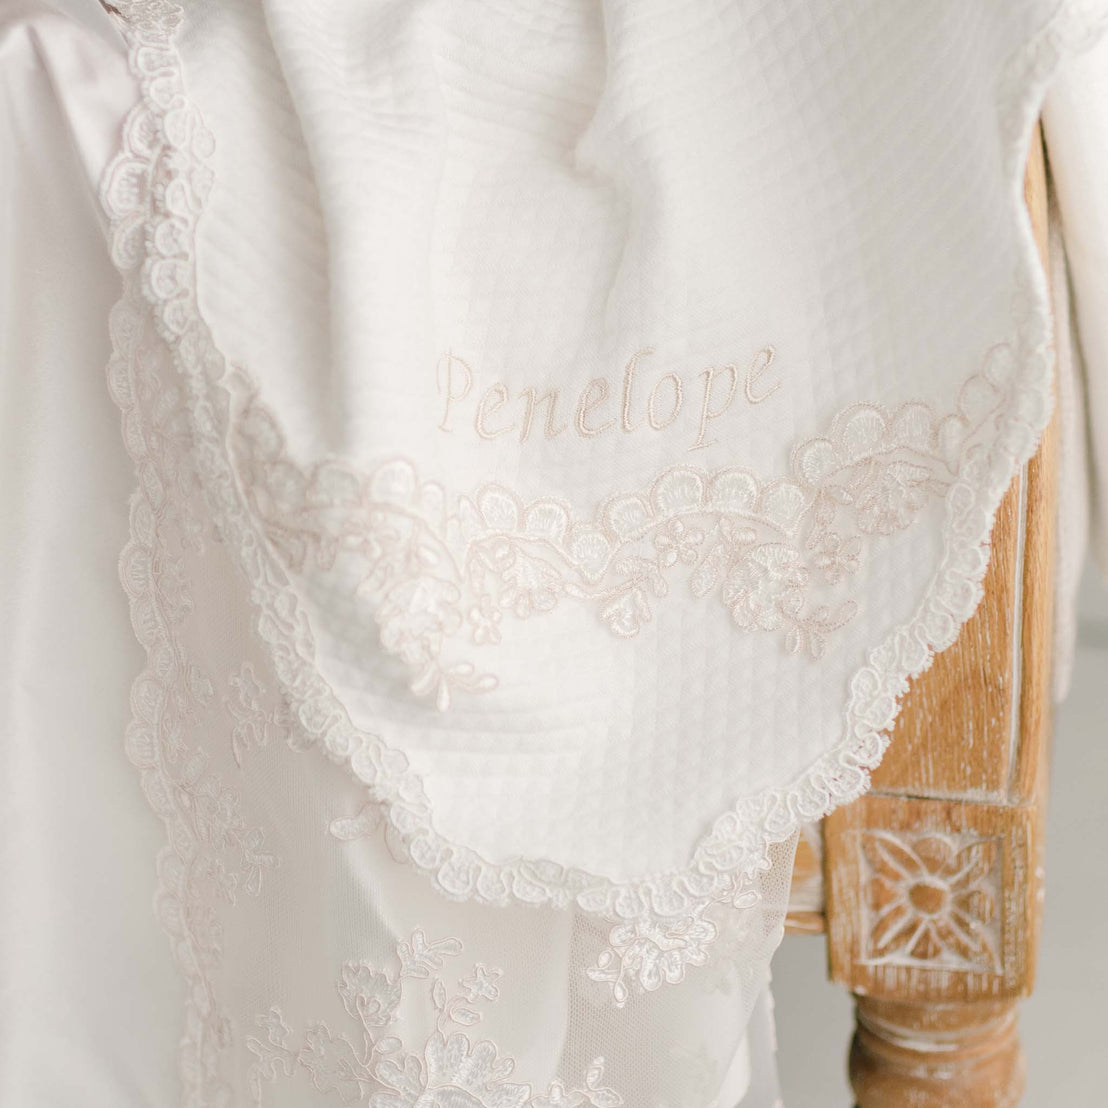 Close up photo of personalized baptism blanket with the name Penelope embroidered in silk on corner.